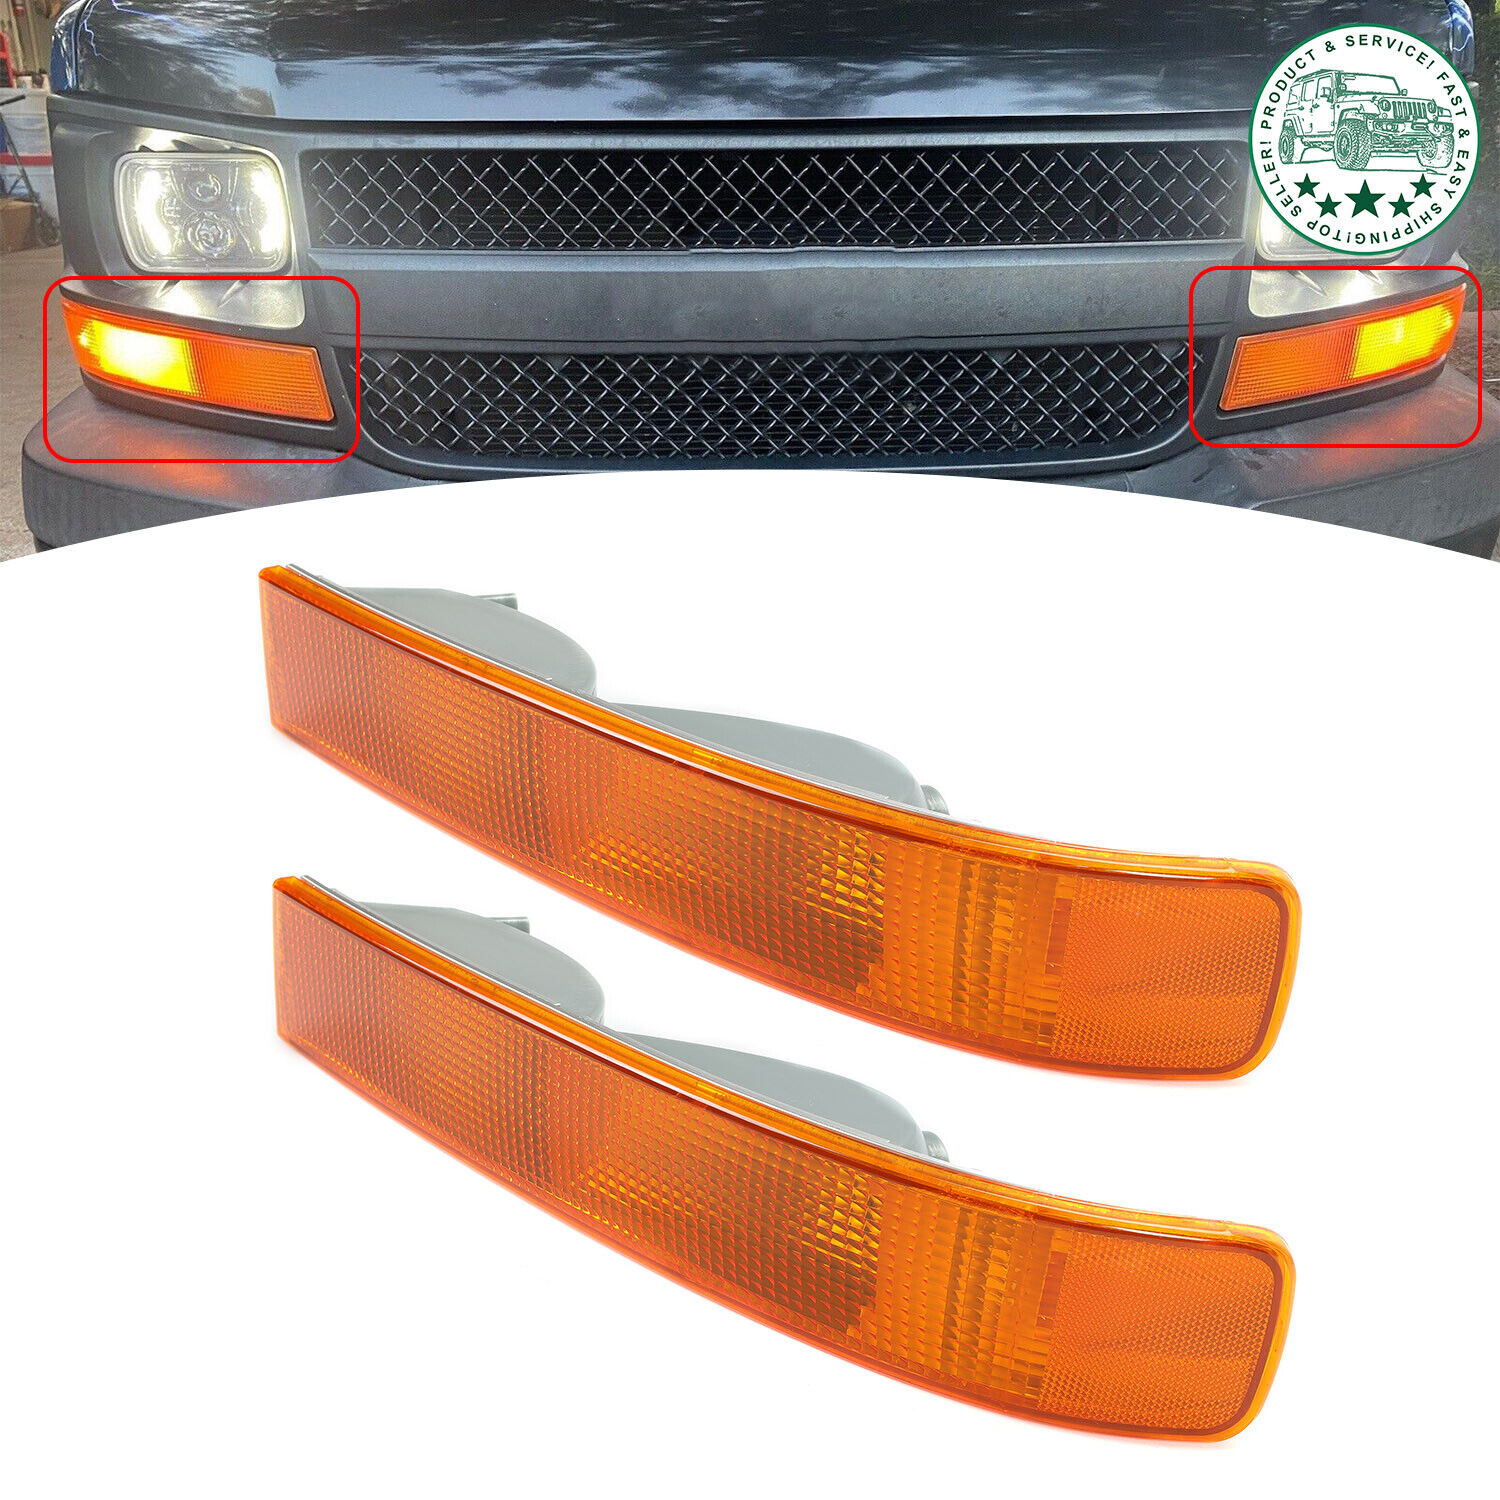 Pair Parking Light Turn Signal Directional Lamp For 03-23 Chevy GMC Express Van